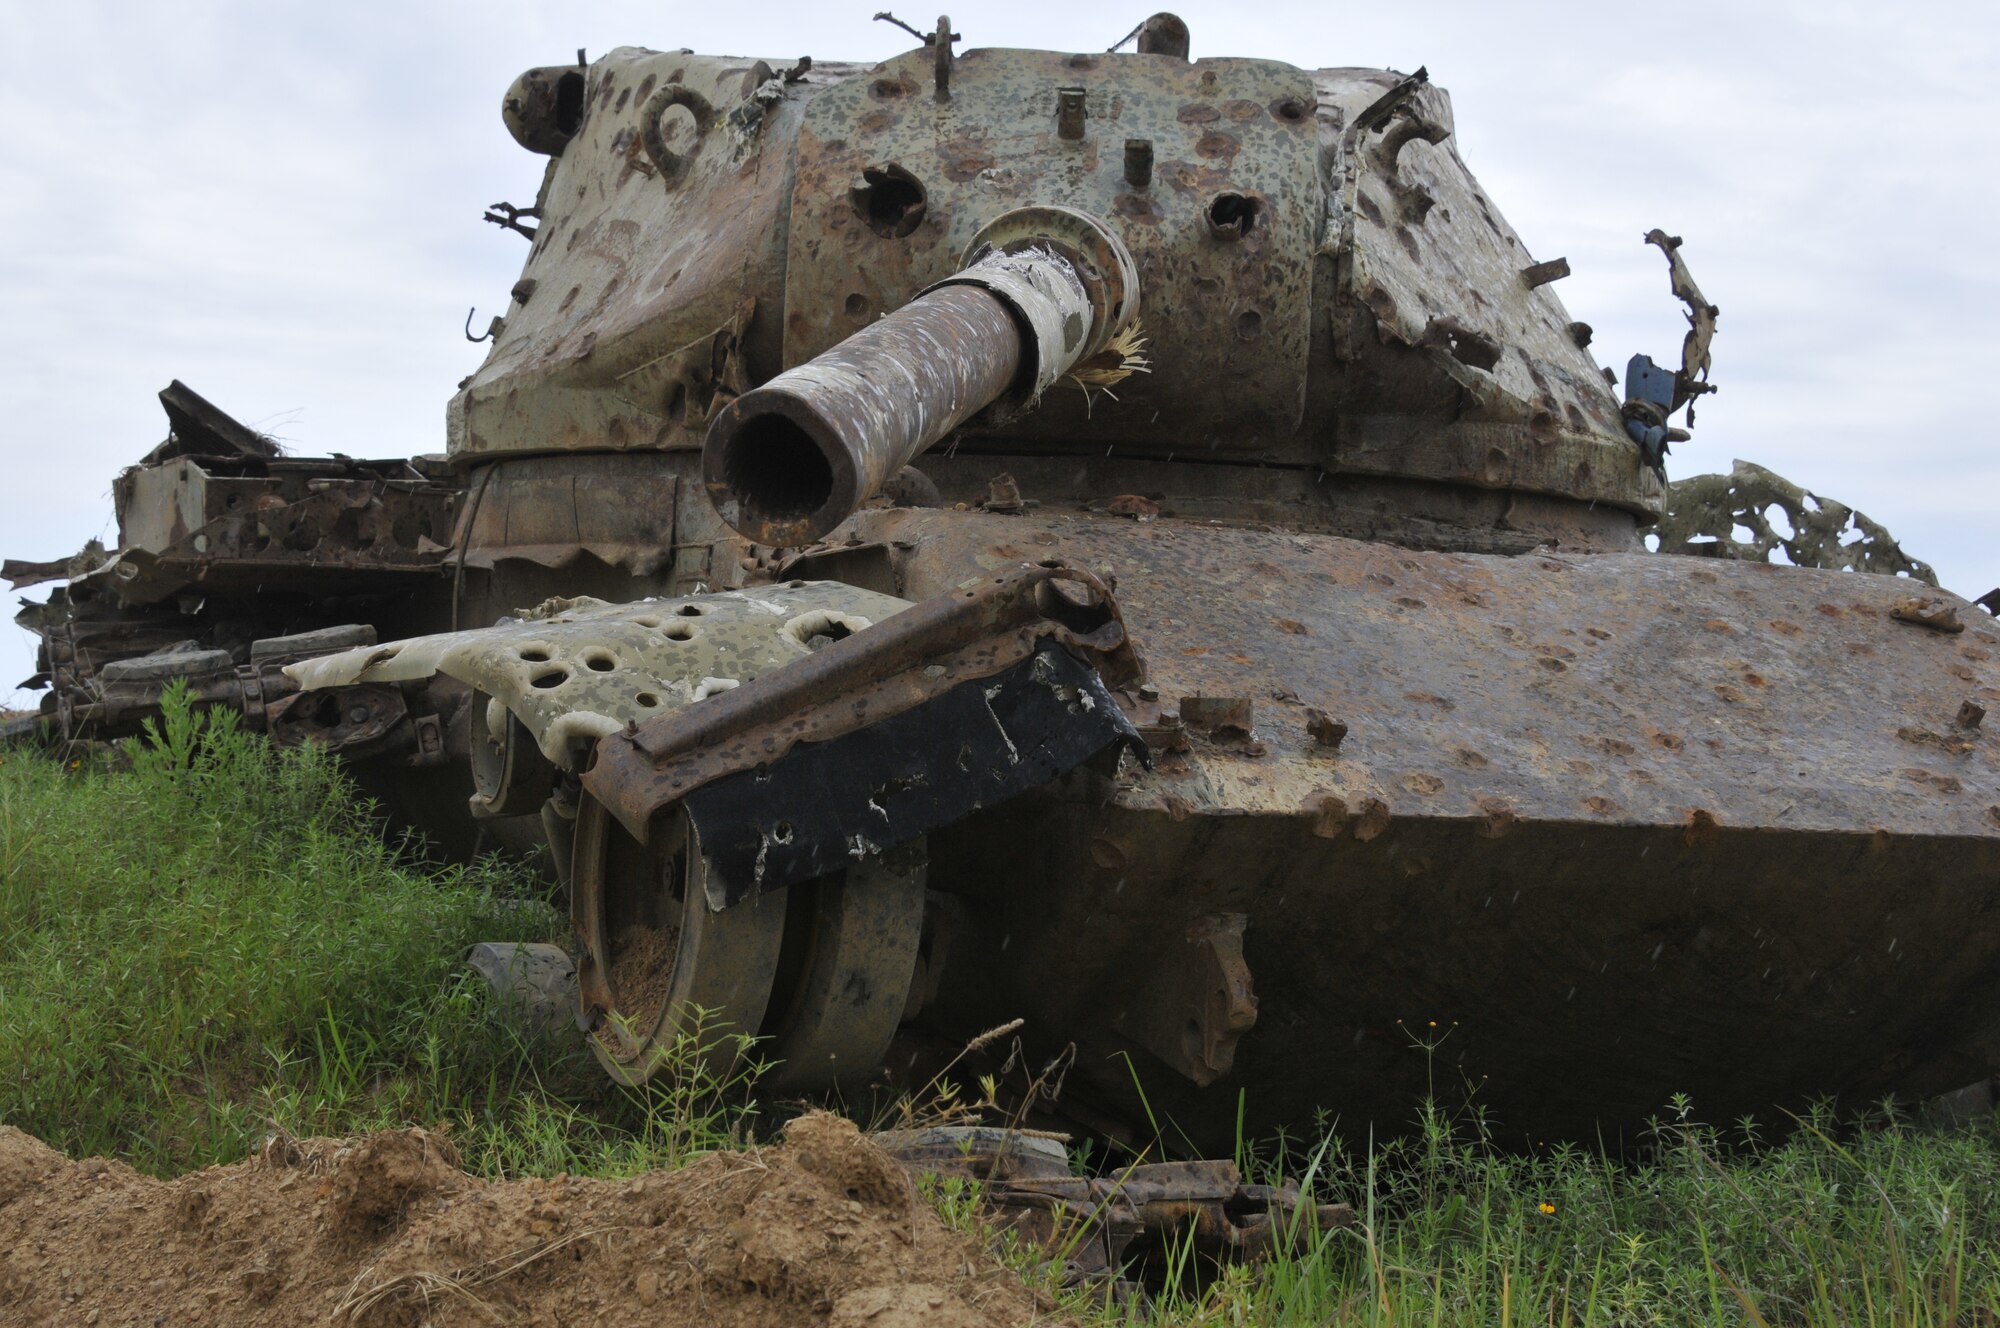 A US M-60 tank sits at 188th Wing Detachment 1 Razorback Range at Fort Chaffee Maneuver Training Center, Arkansas, July 14, 2014. The range is maintained by the 188th and provides varying types of training to military units from around the world. (U.S. Air National Guard photo by Staff Sgt. John Suleski/released)